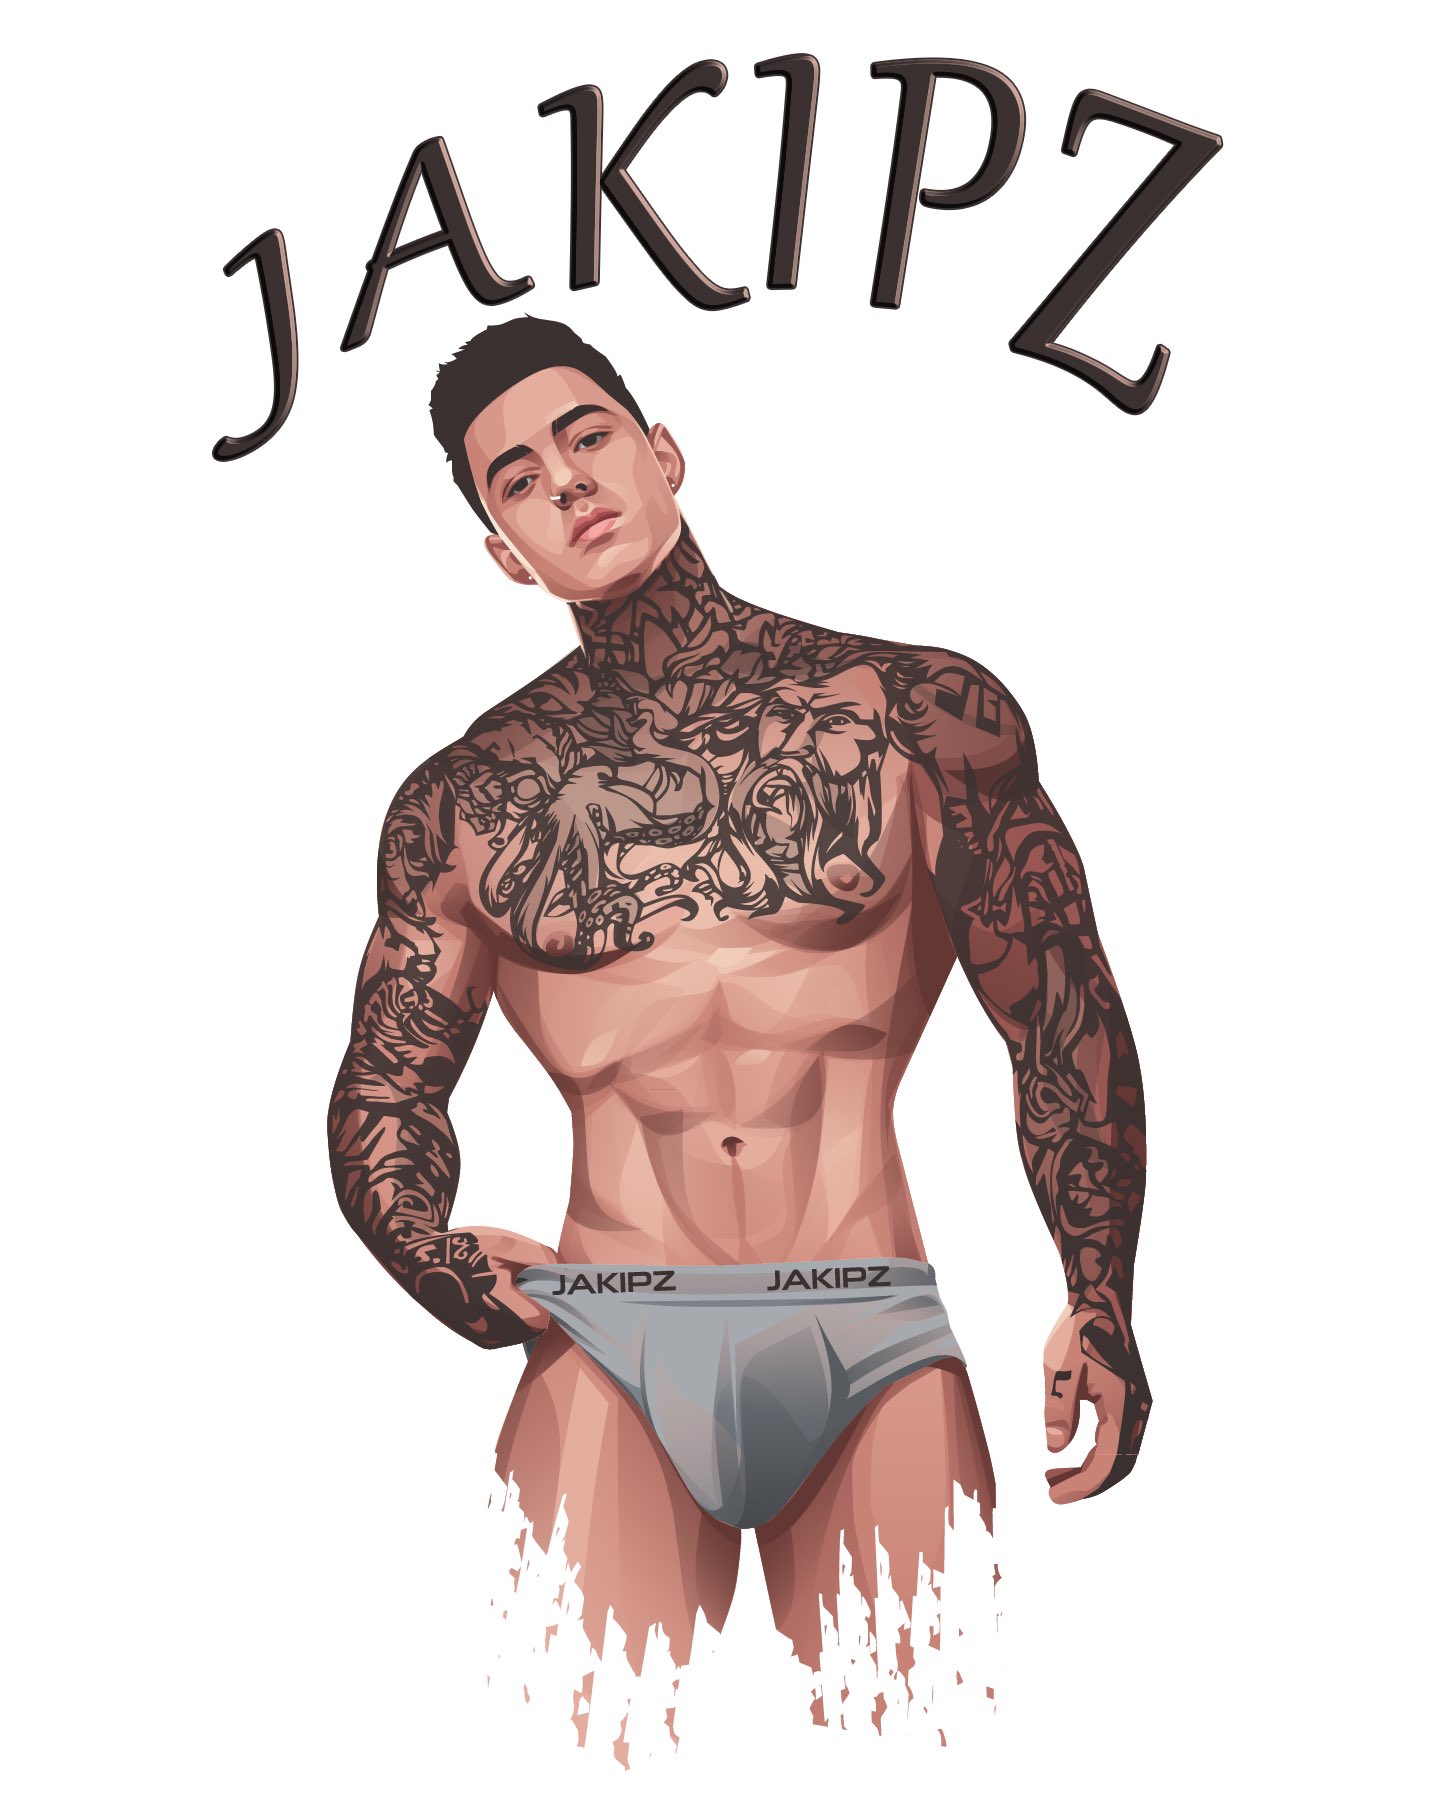 Jake Andrich / Jakipz ™ on Twitter: "Just a concept for some